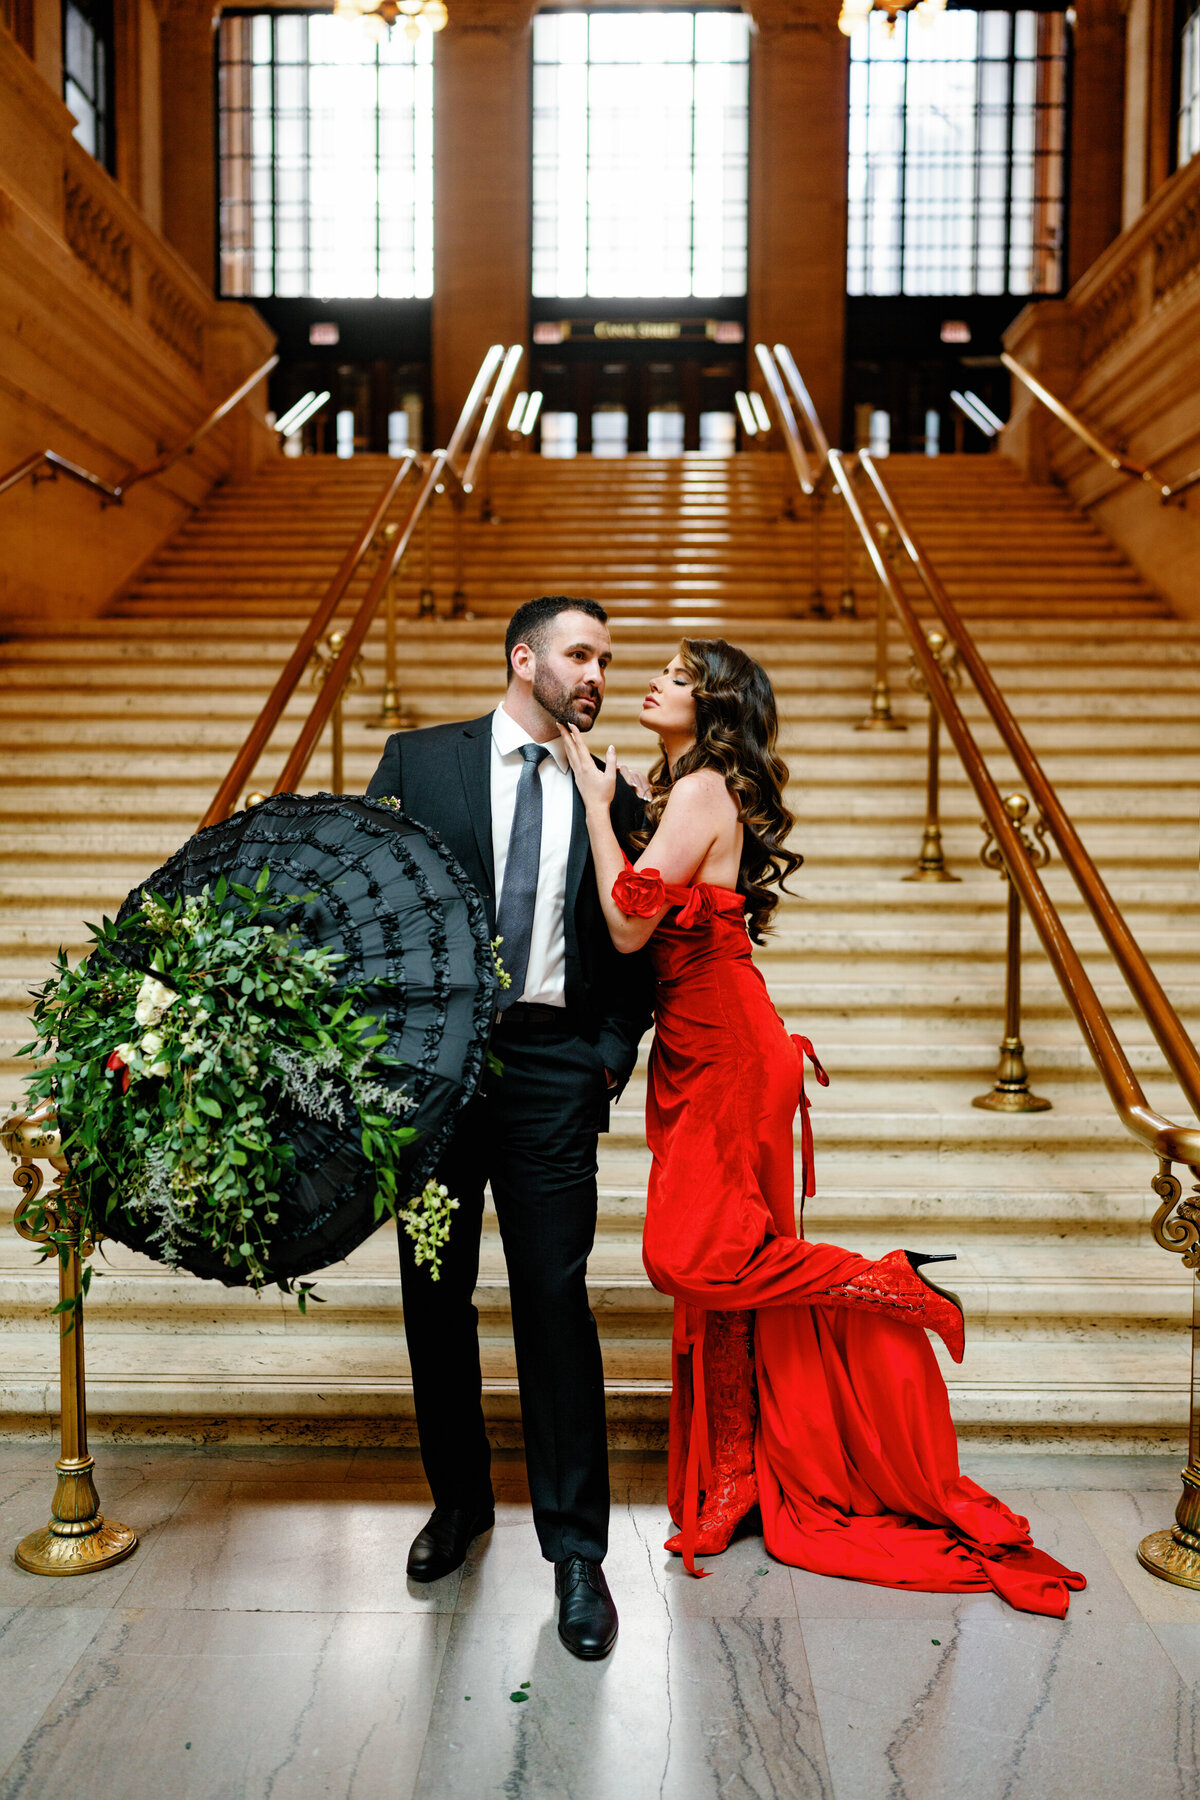 Aspen-Avenue-Chicago-Wedding-Photographer-Union-Station-Chicago-Theater-Engagement-Session-Timeless-Romantic-Red-Dress-Editorial-Stemming-From-Love-Bry-Jean-Artistry-The-Bridal-Collective-True-to-color-Luxury-FAV-13